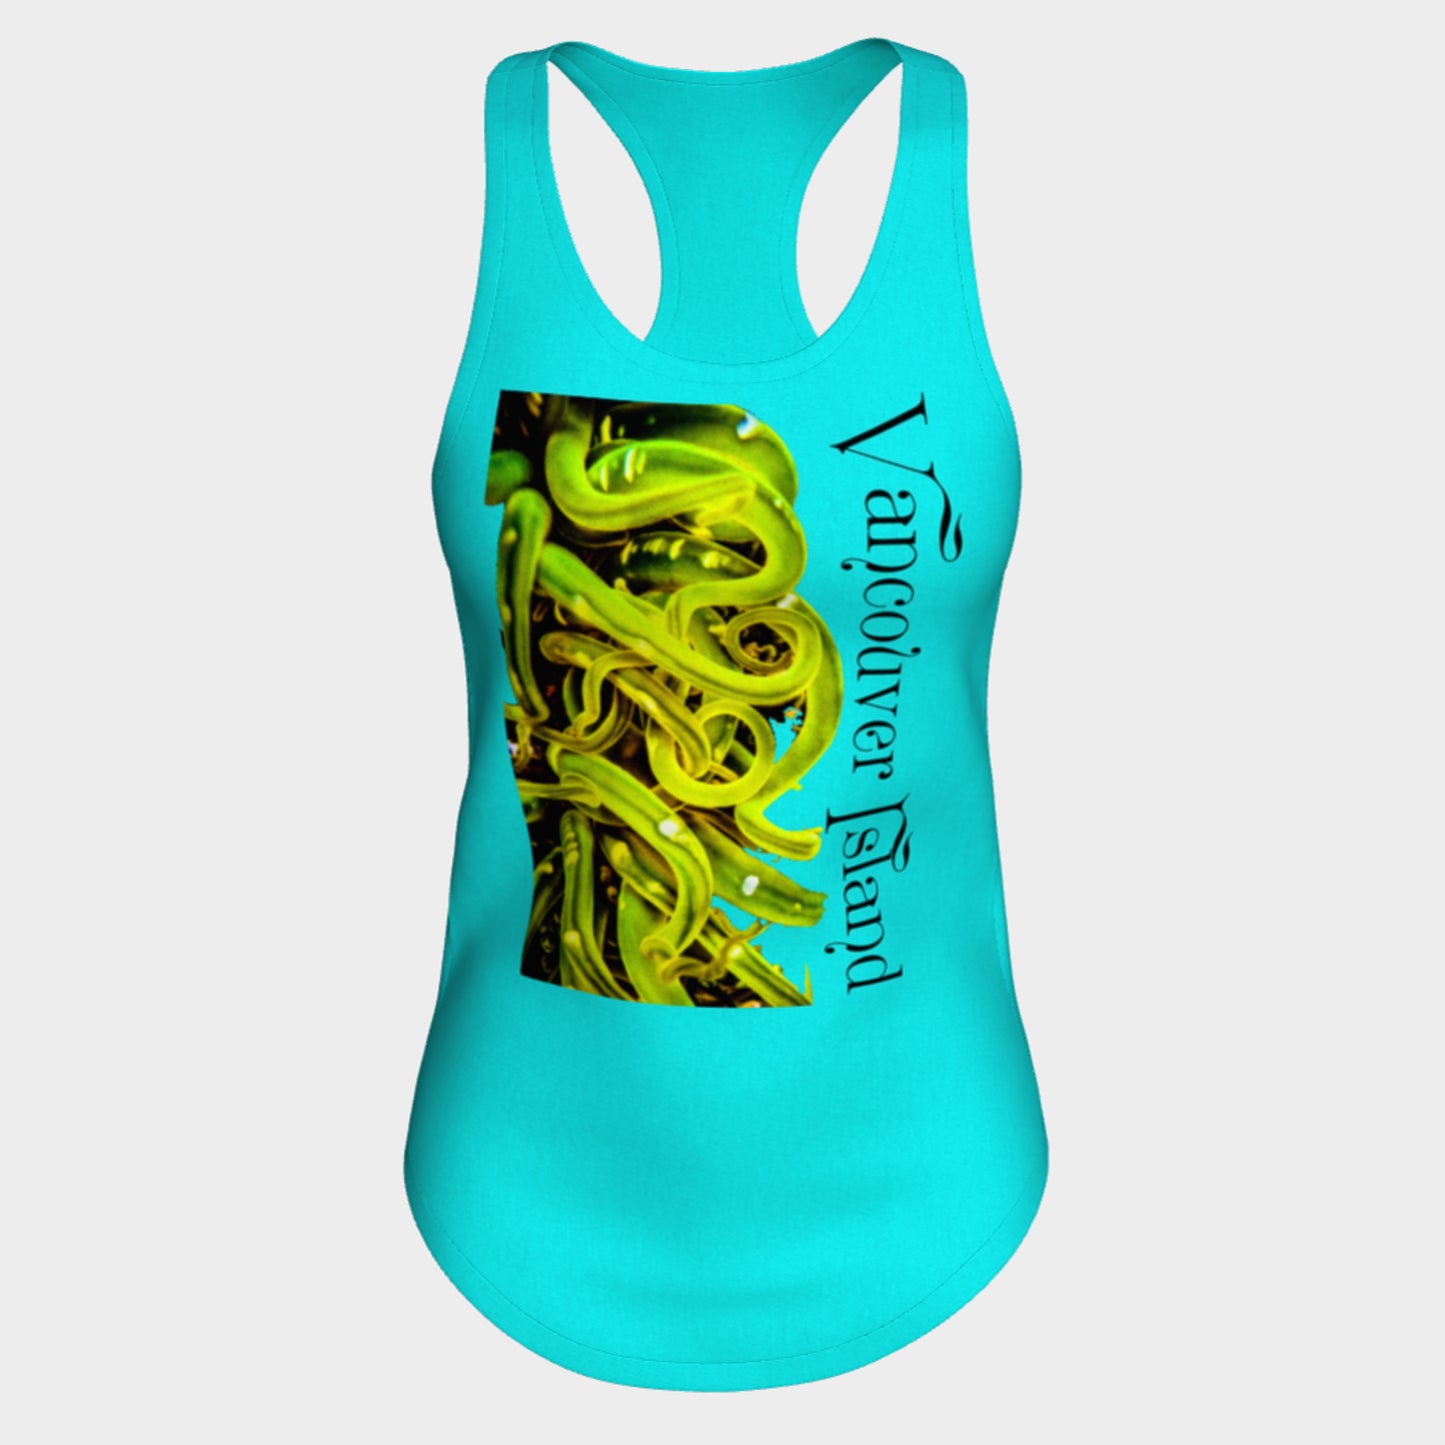 Sea Anemone Vancouver Island Racerback Tank Top  Excellent choice for the summer or for working out.   Made from 60% spun cotton and 40% poly for a mix of comfort and performance, you get it all (including my photography and digital art) with this custom printed racerback tank top.   Van Isle Goddess Next Level racerback tank top will quickly become you go-to tank top because of the super comfy fit!